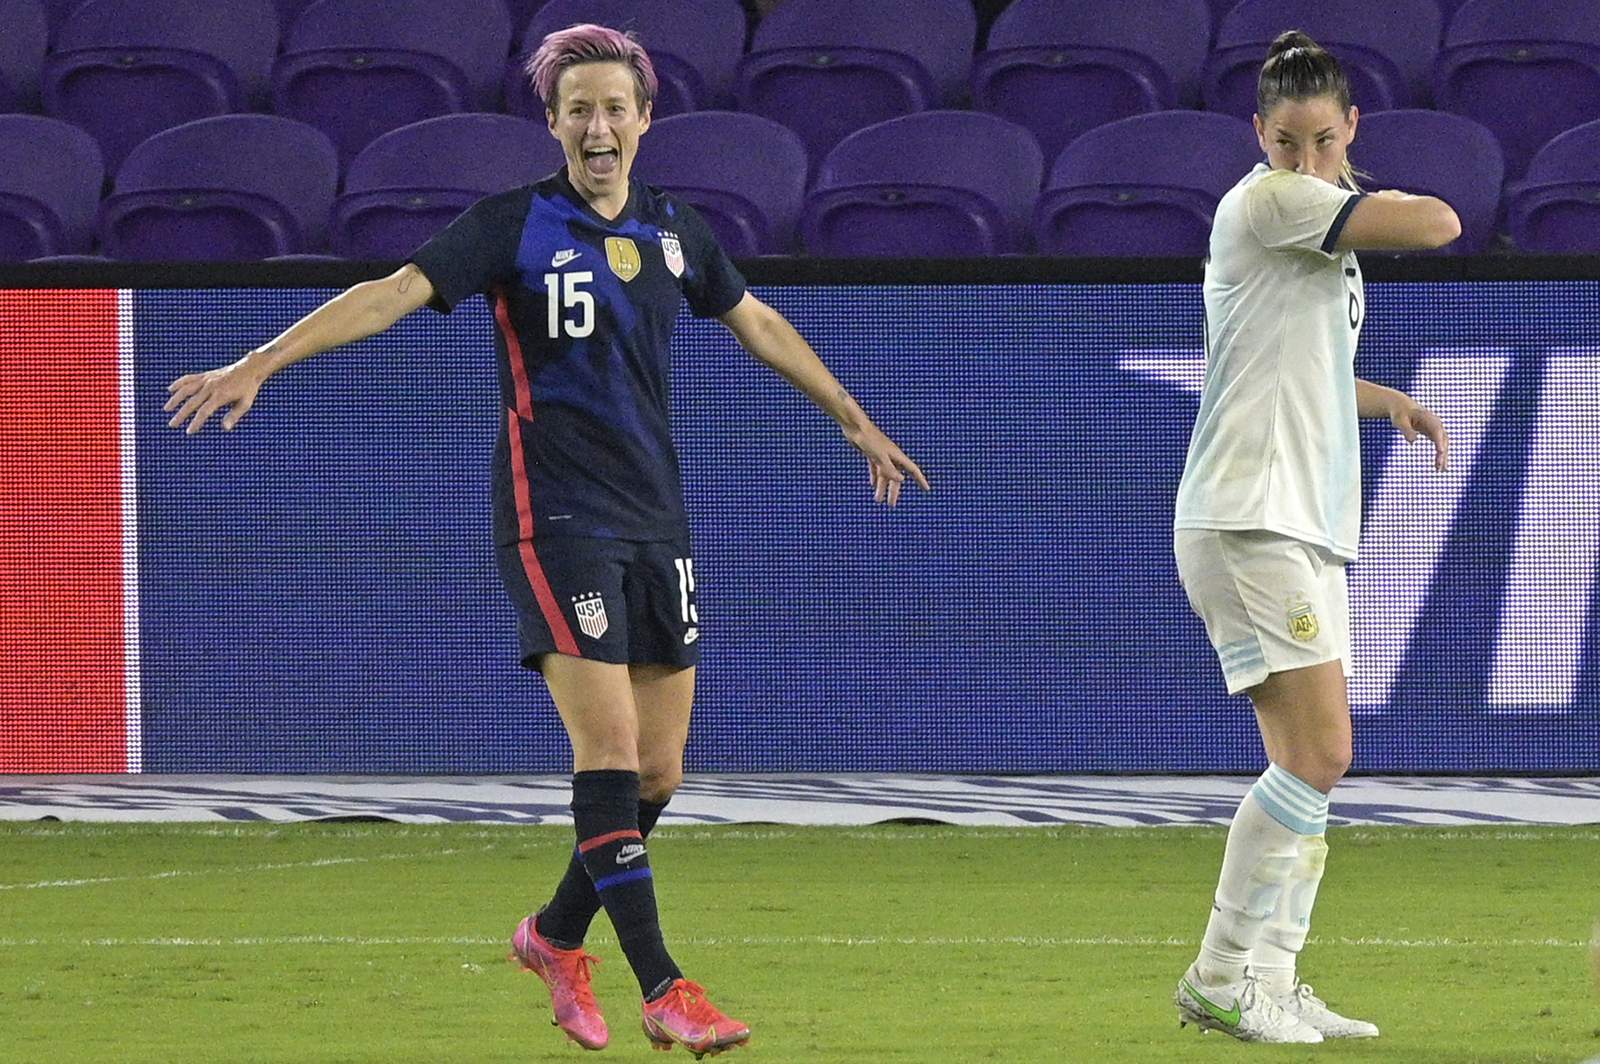 Rapinoe-led US beats Argentina 6-0 to win SheBelieves Cup